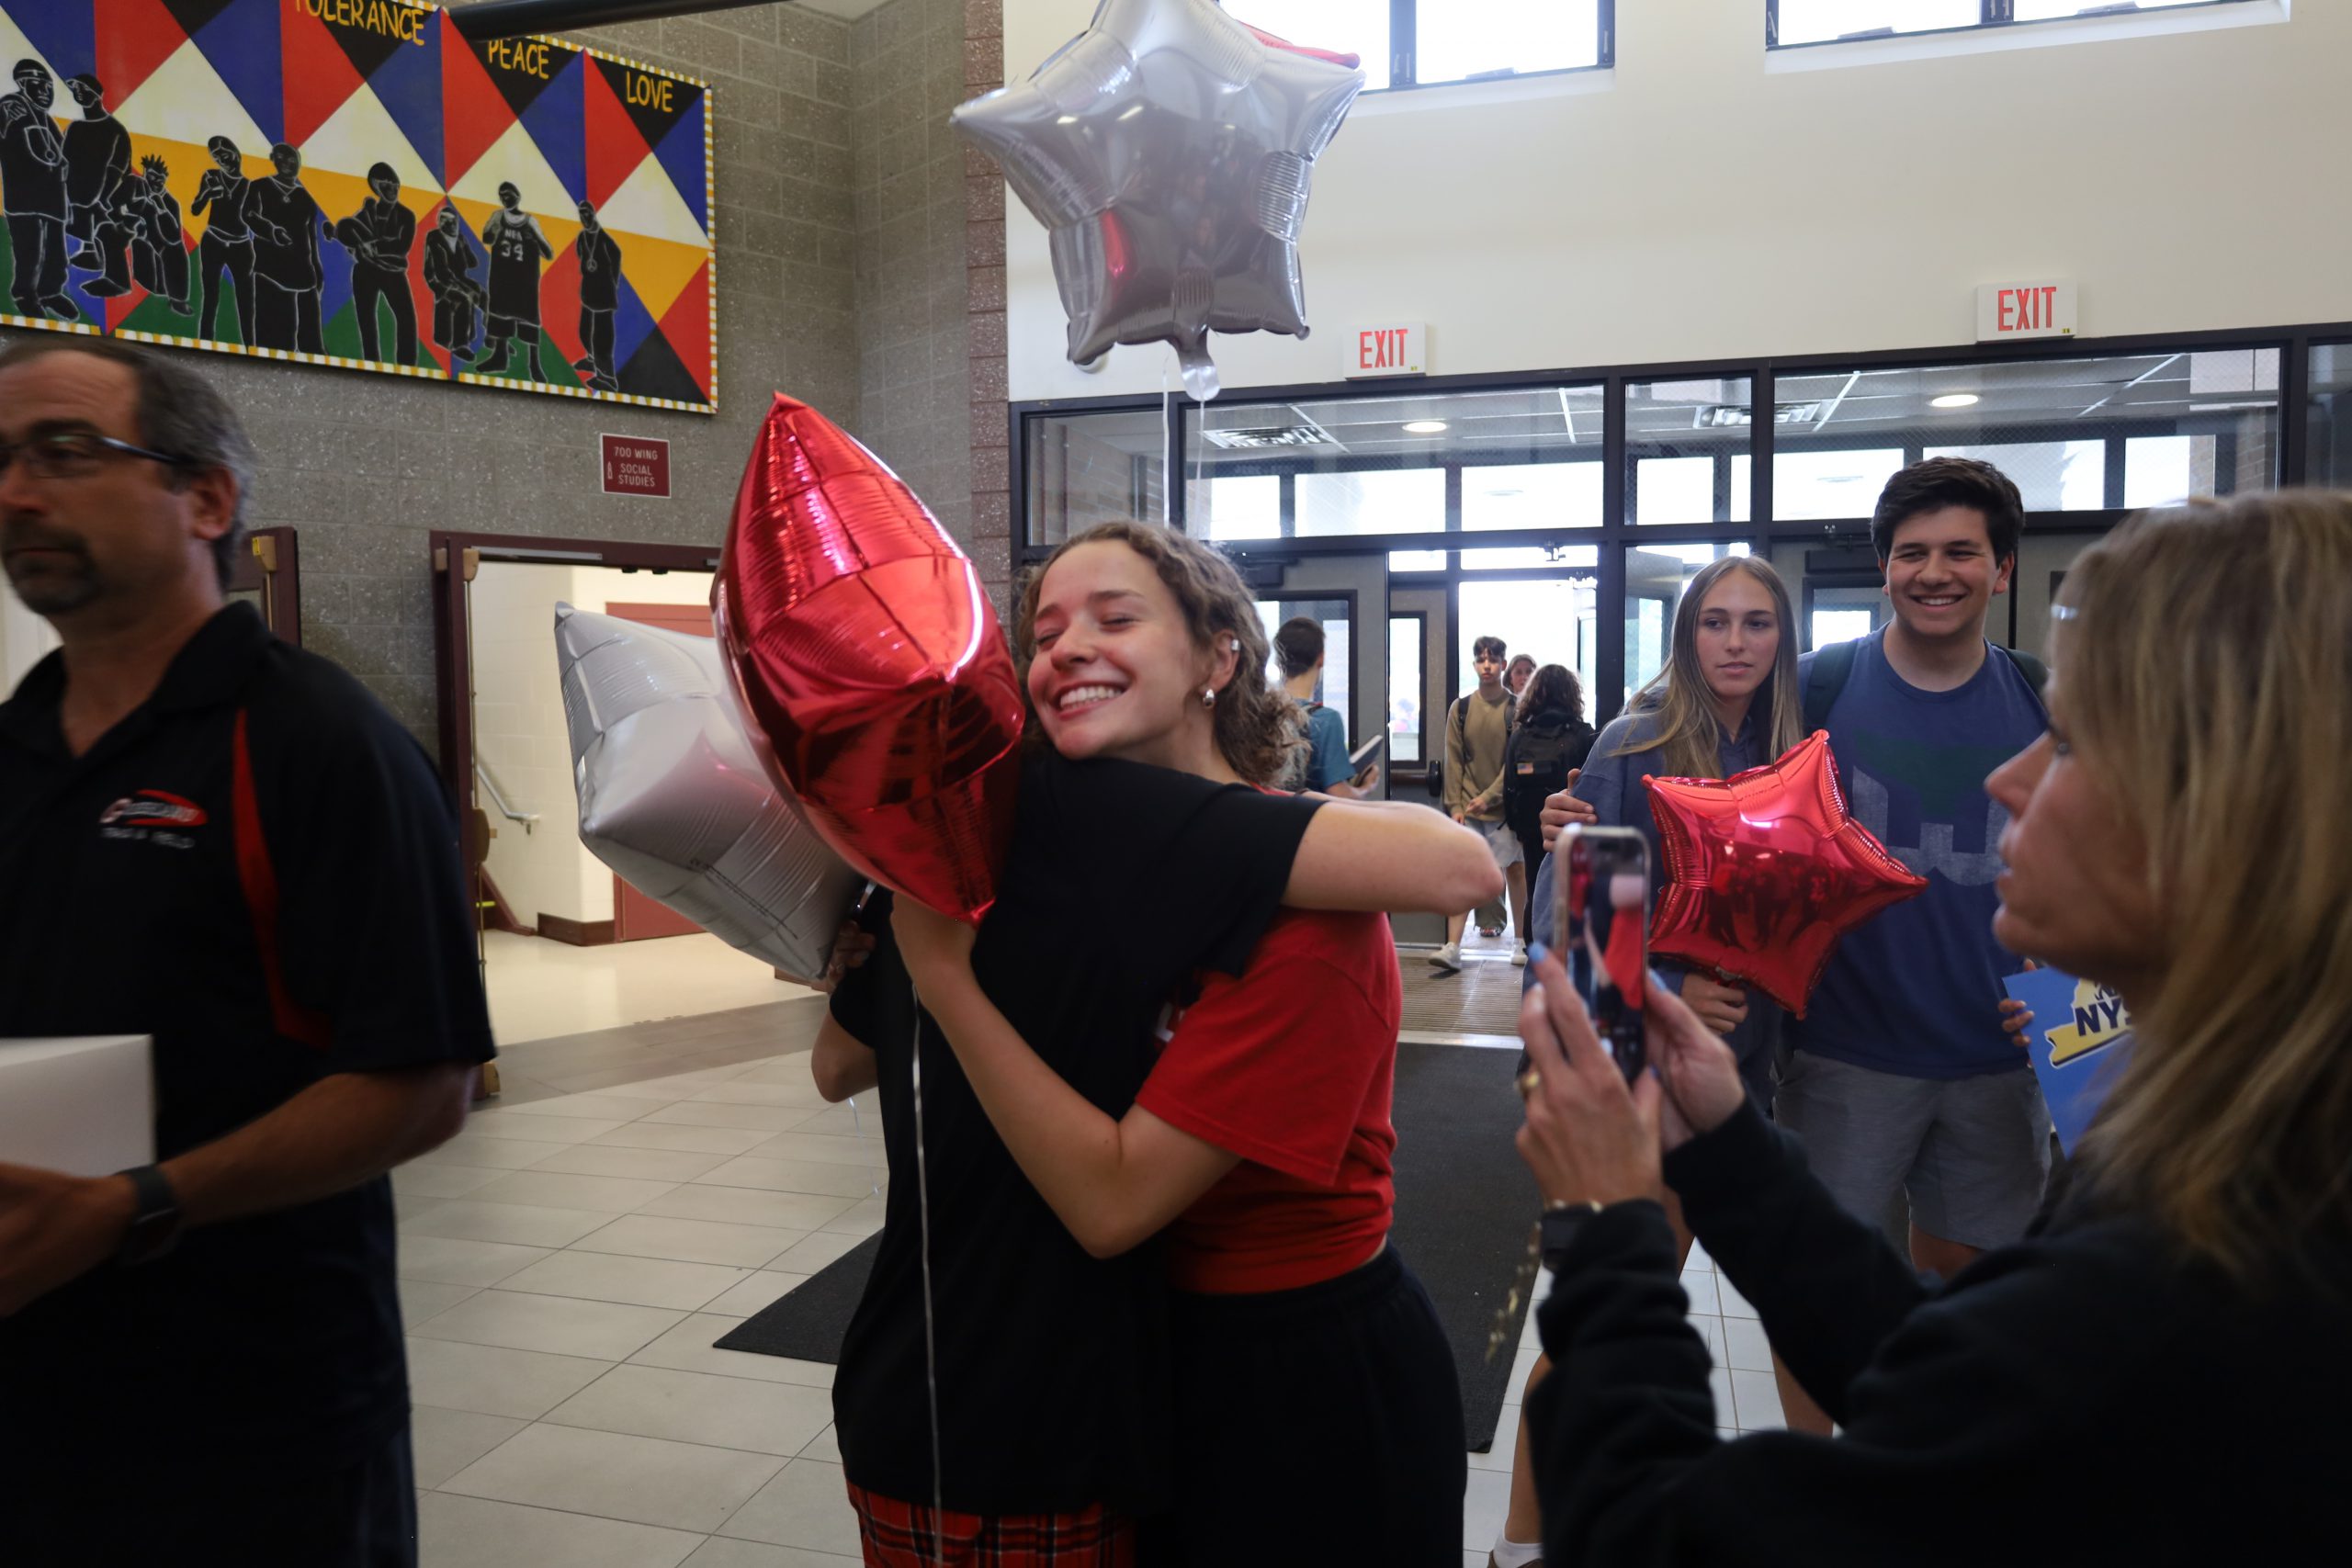 A student hugs another students. One is holding a red balloon in the shape of a star